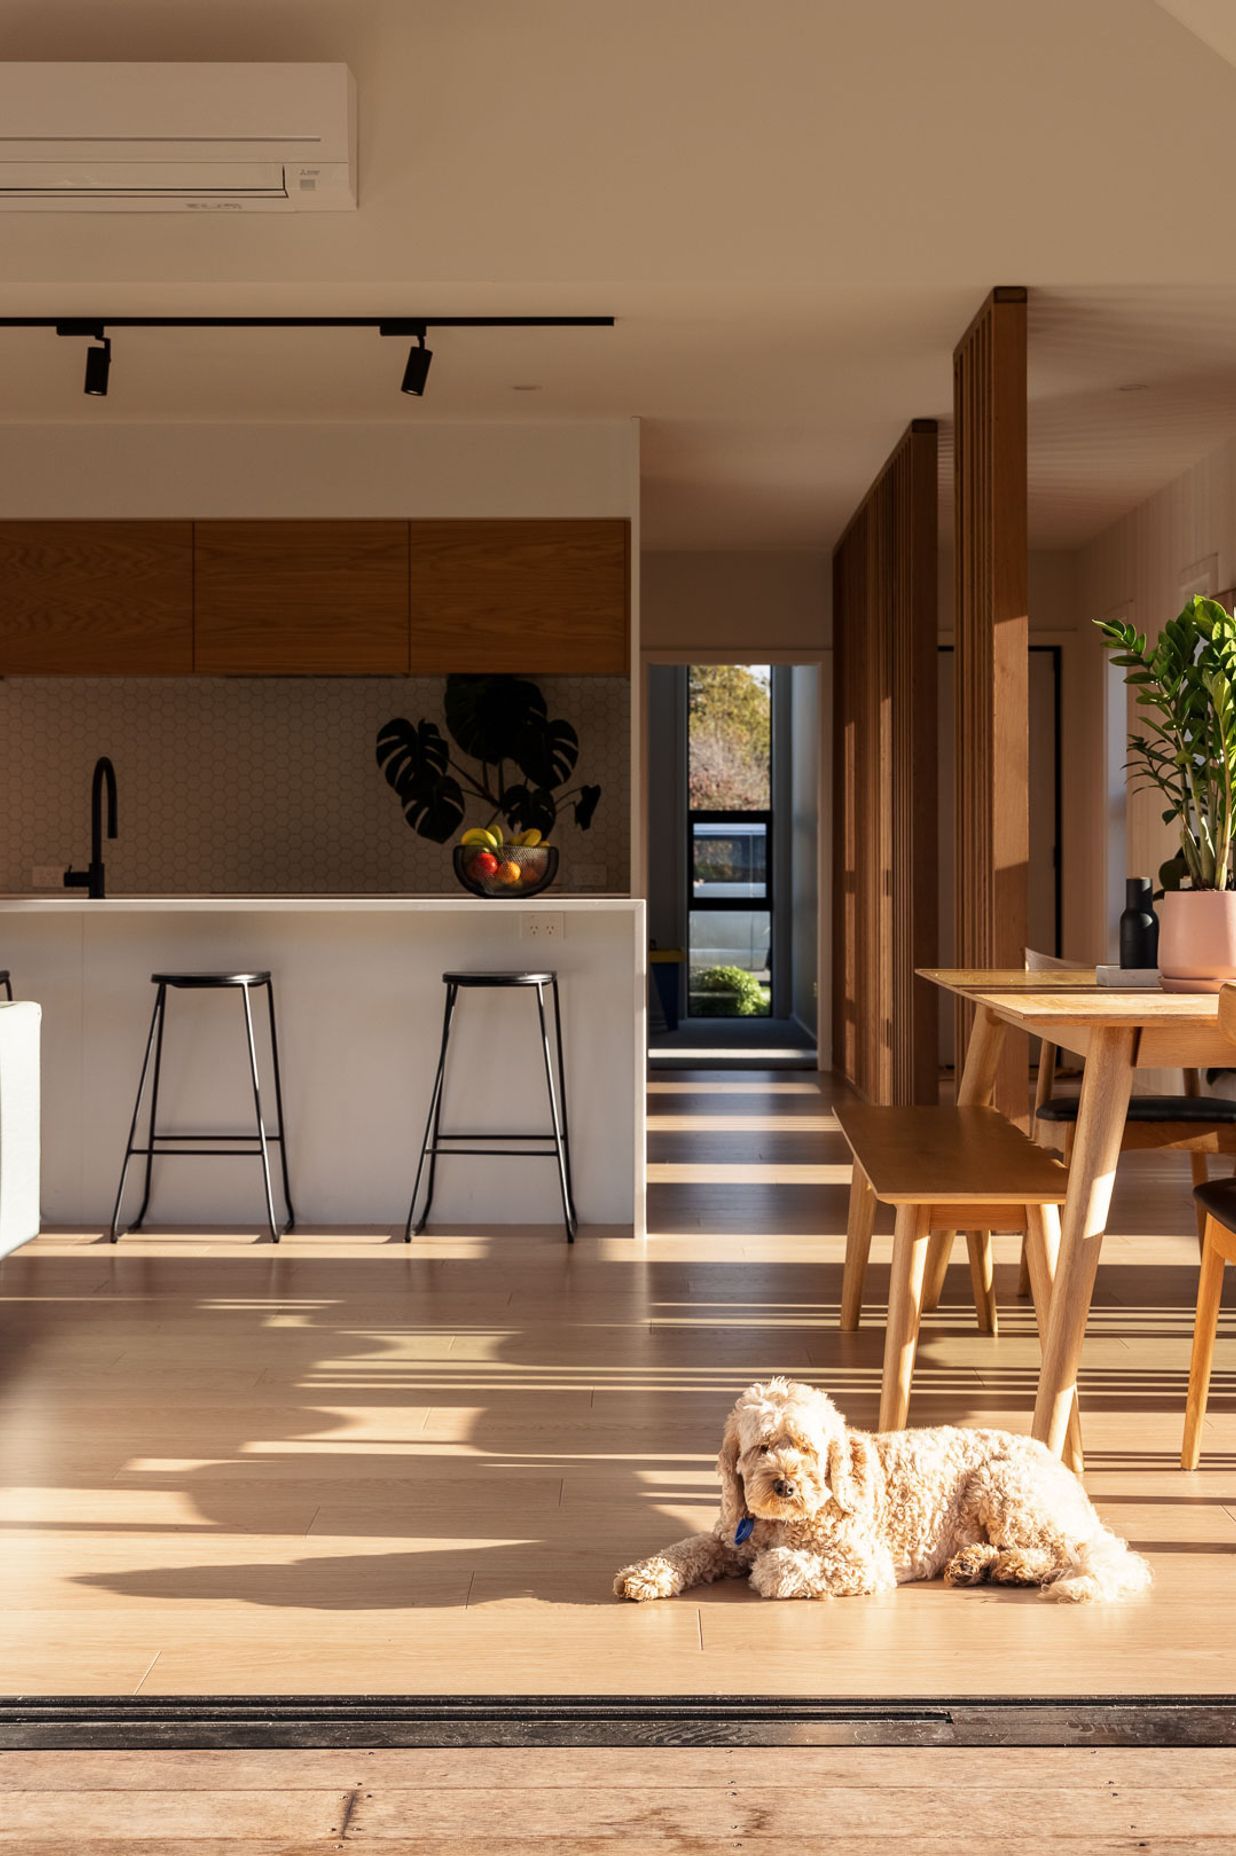 The  living spaces are a collection of multifunction, open-plan rooms, creating distinct functionality while allowing for connection and retreat.